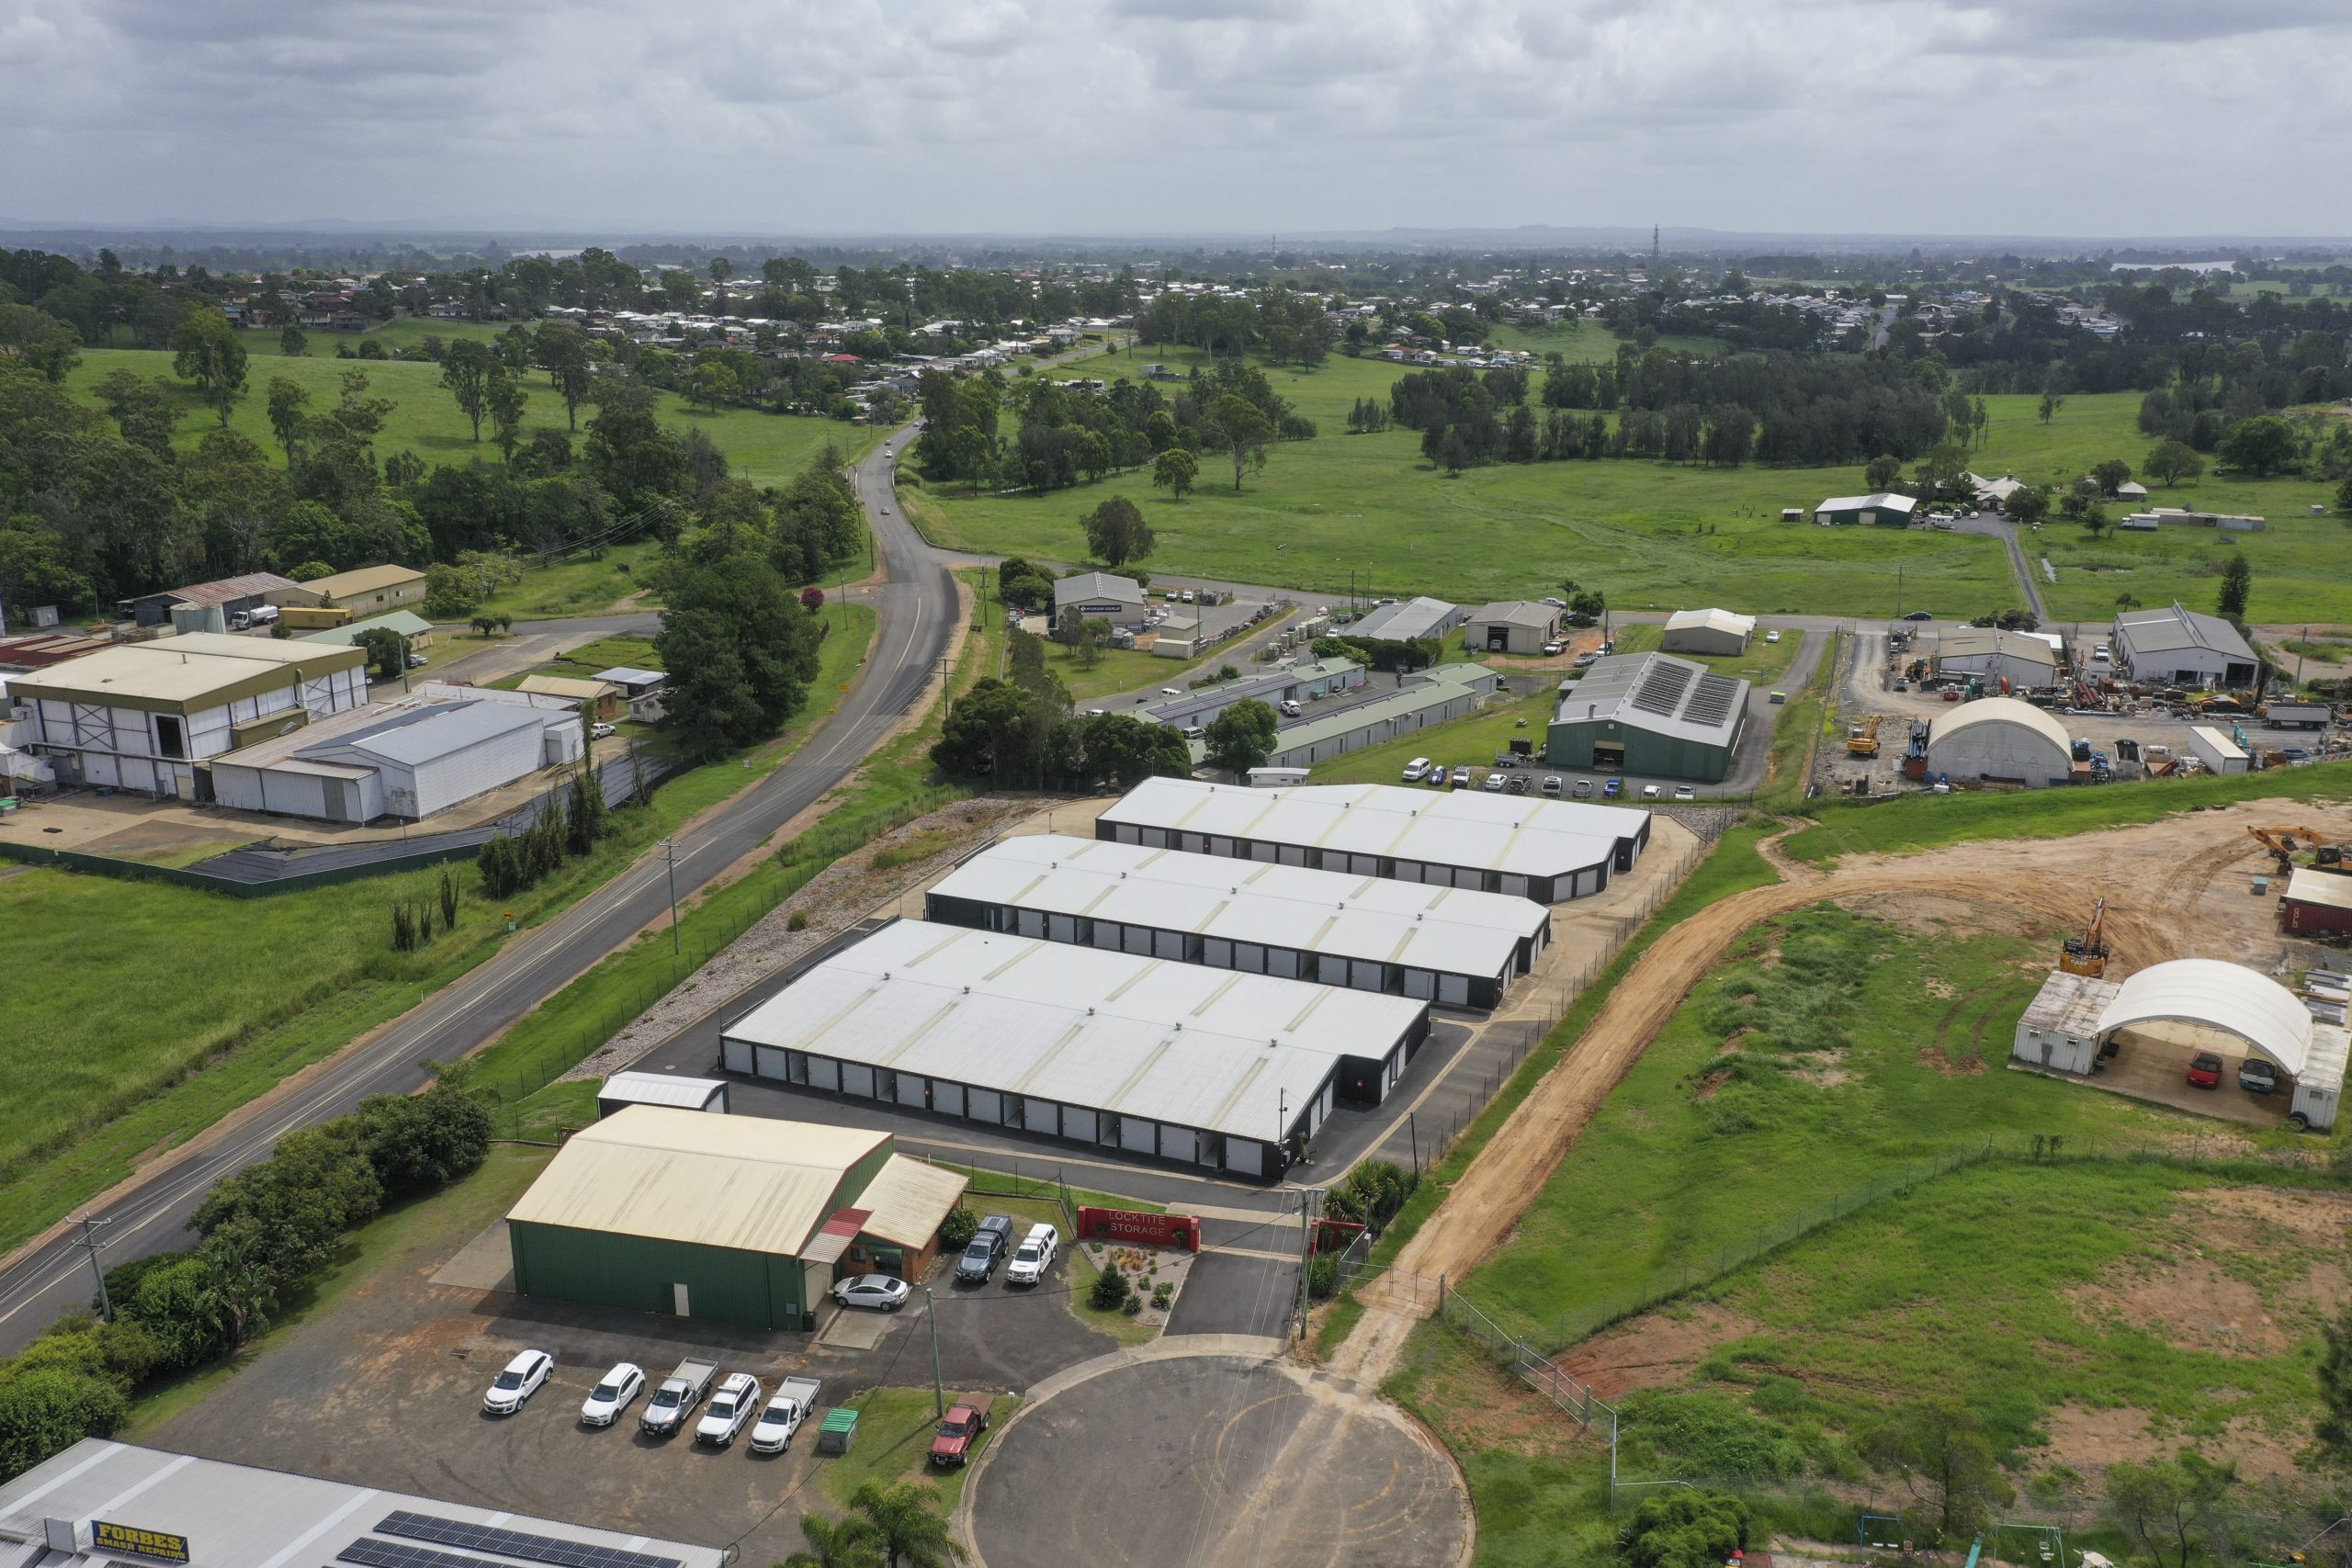 aerial view of storage facility